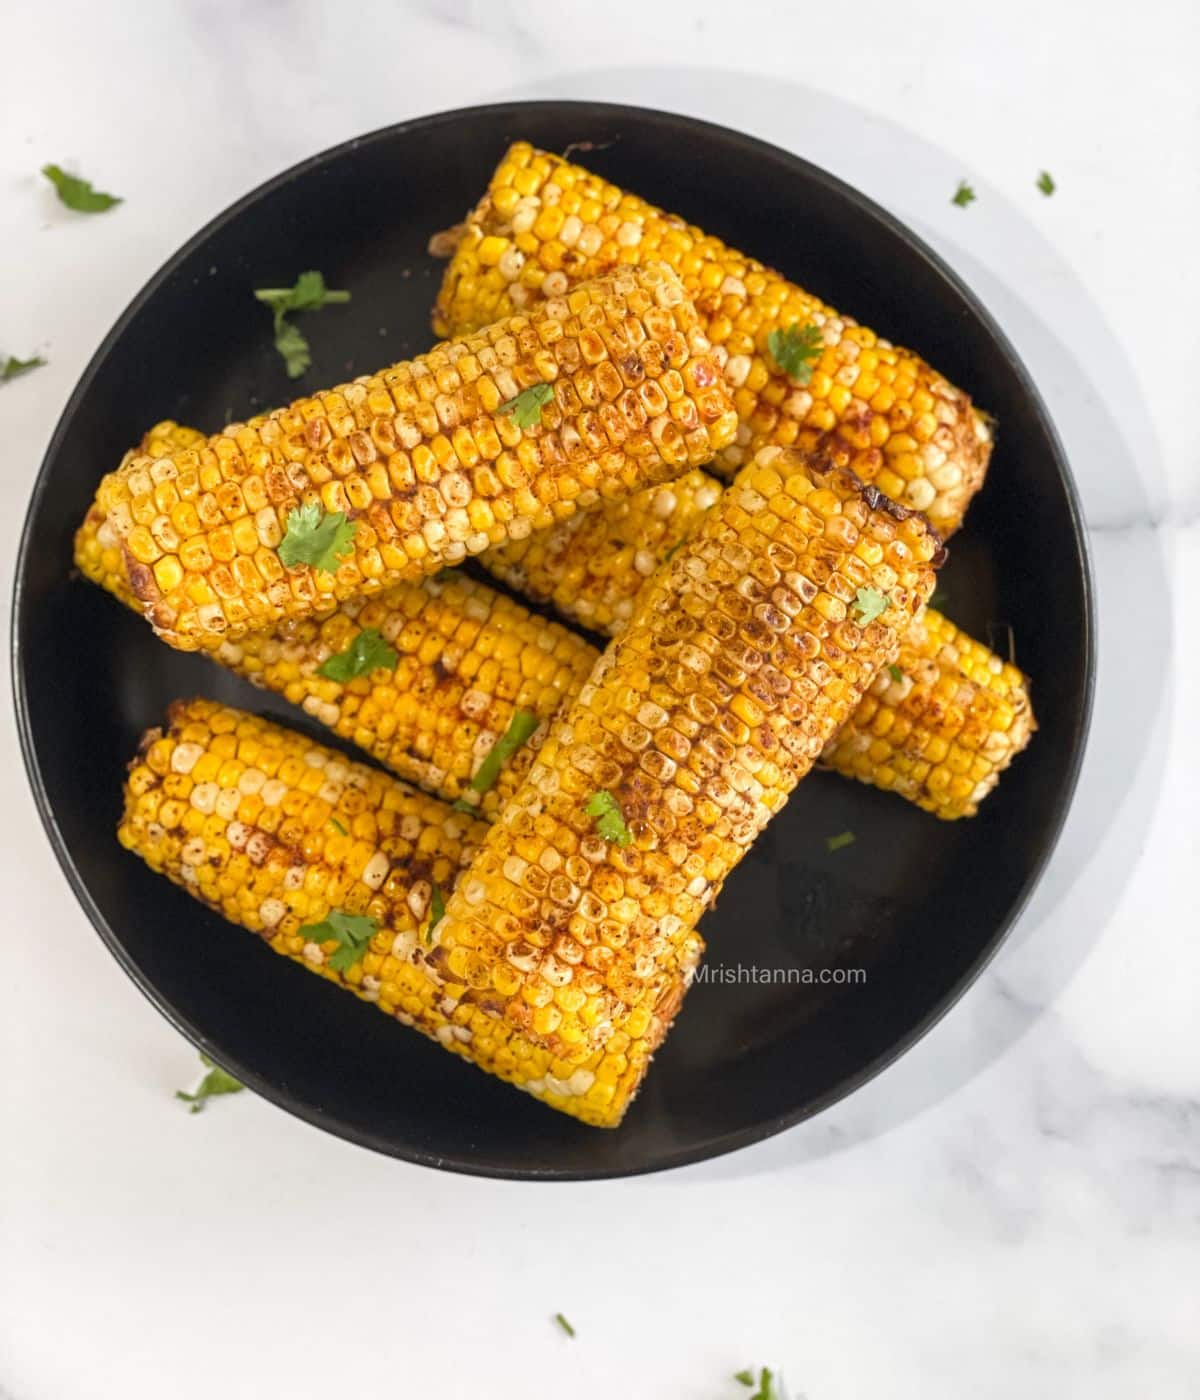 A plate of corn on the cob is on the table topped with spices and herbs.